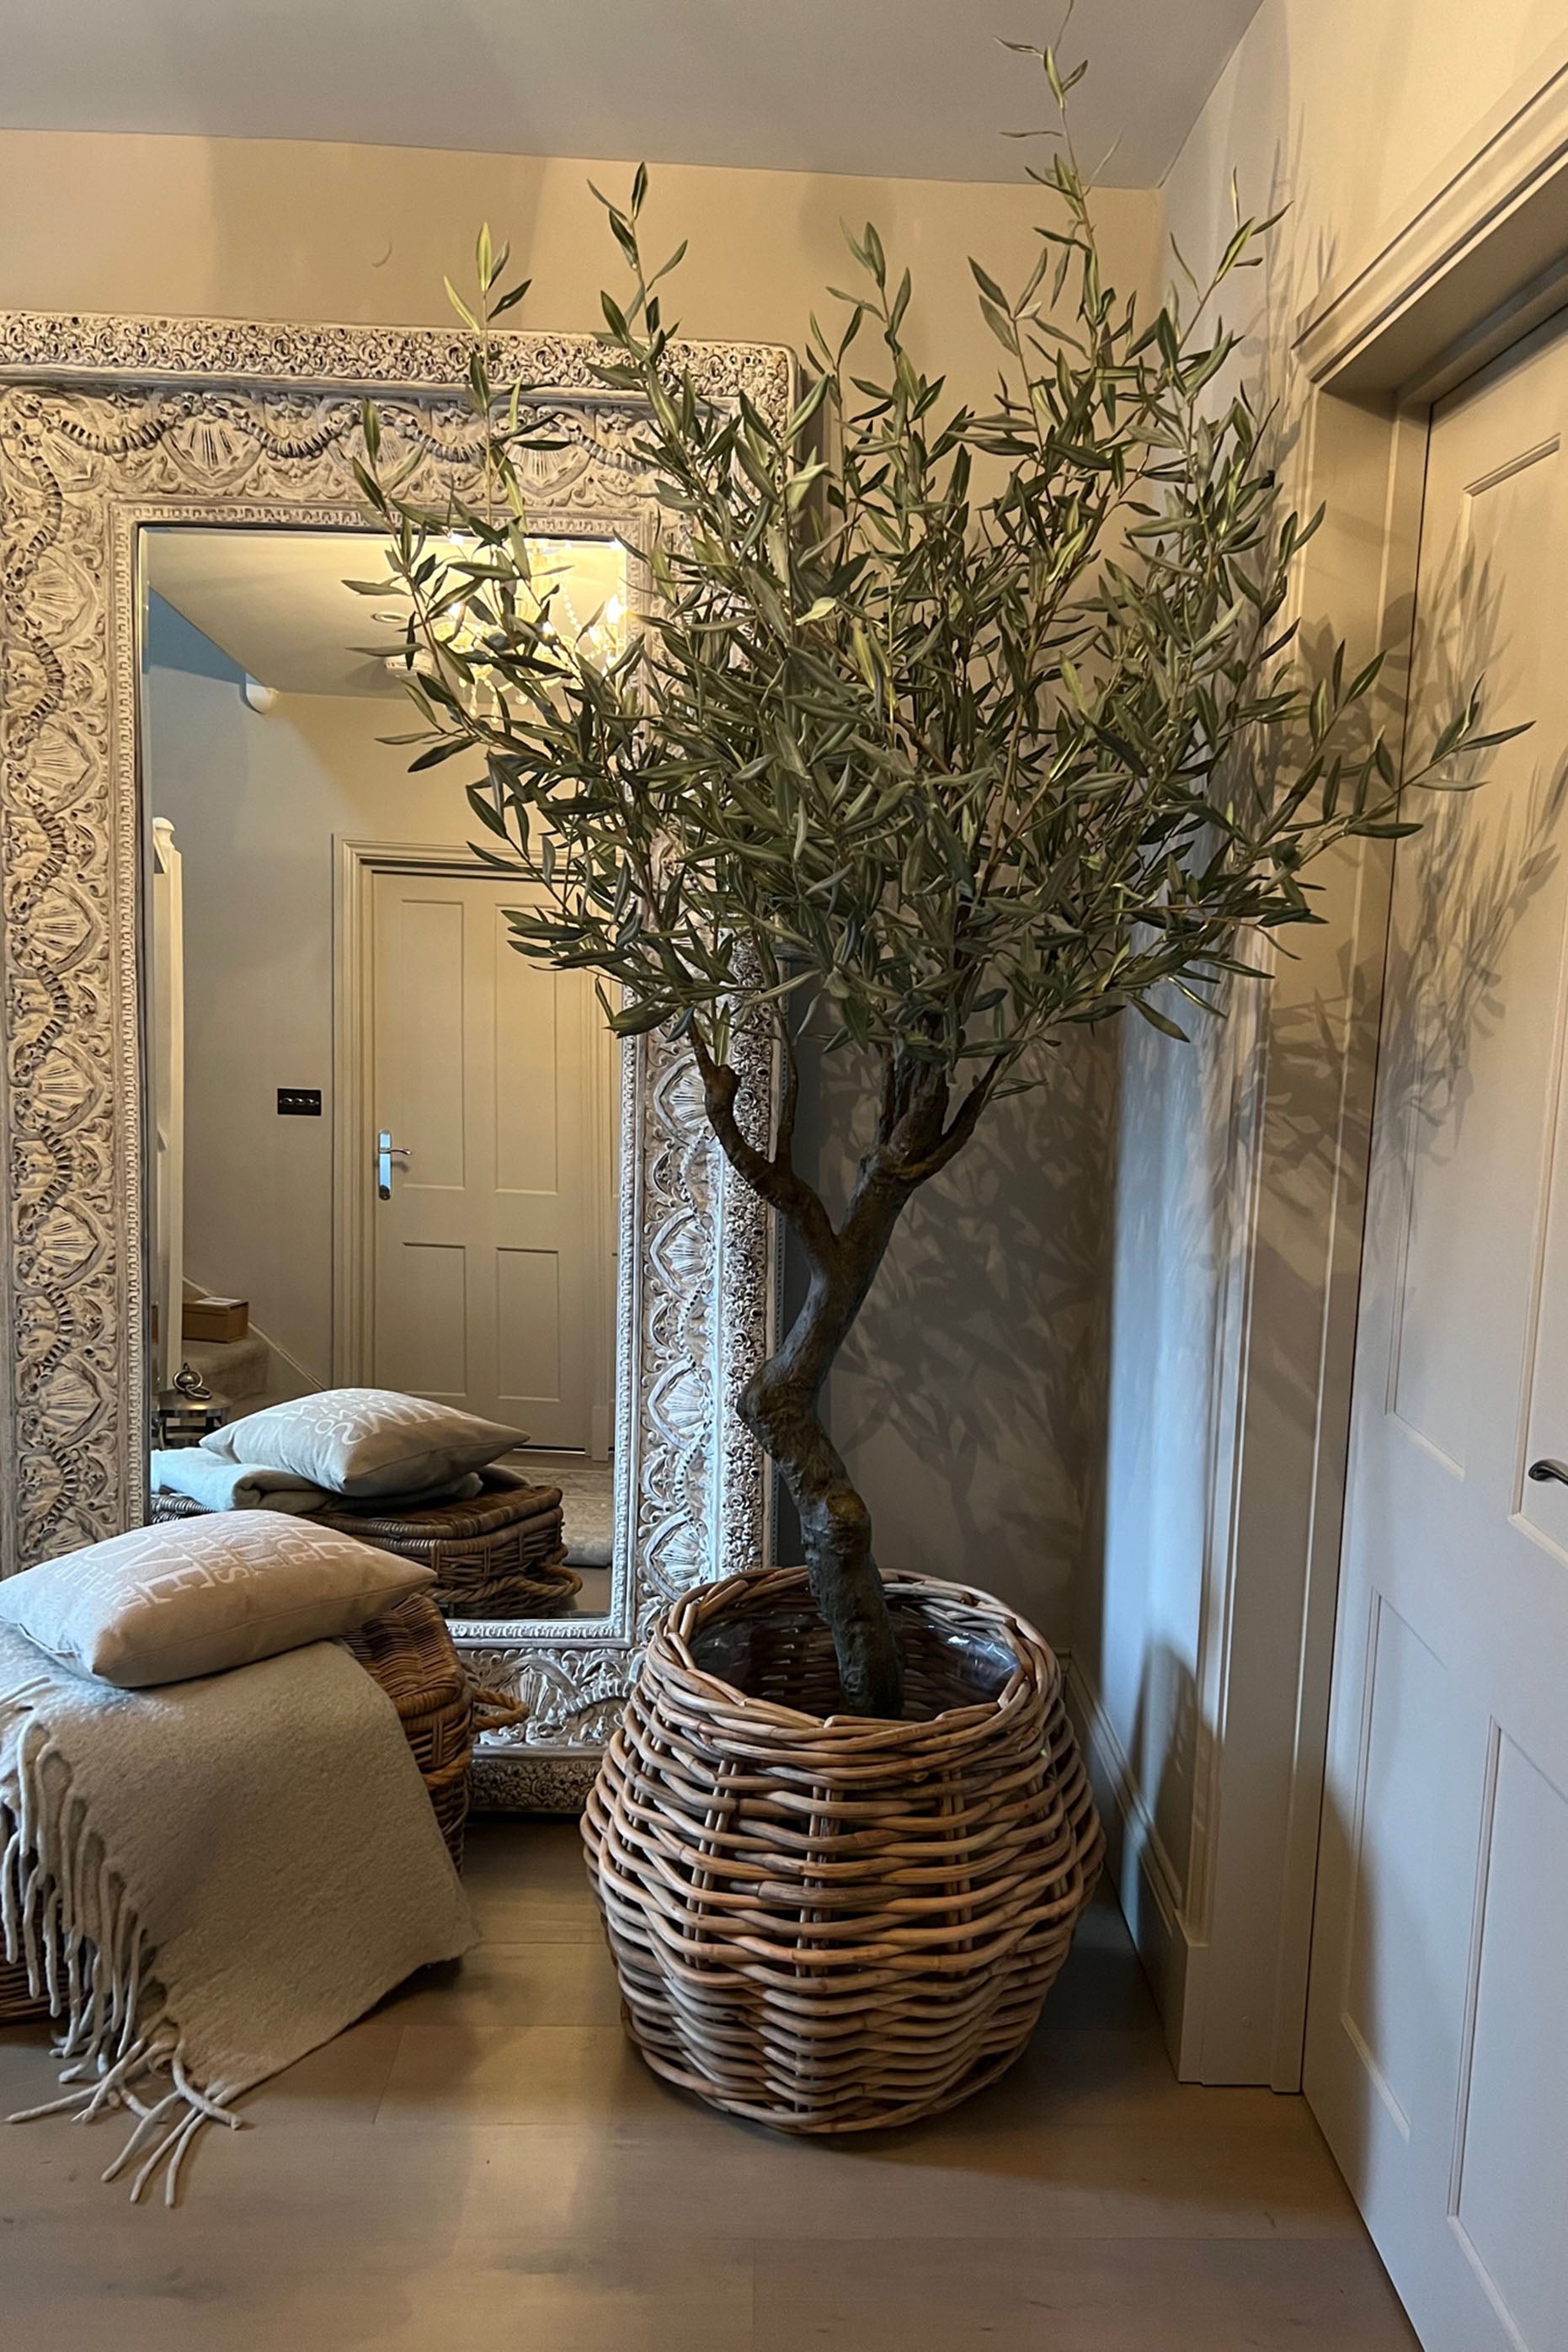 Artificial Olive Tree – RTfact Flowers